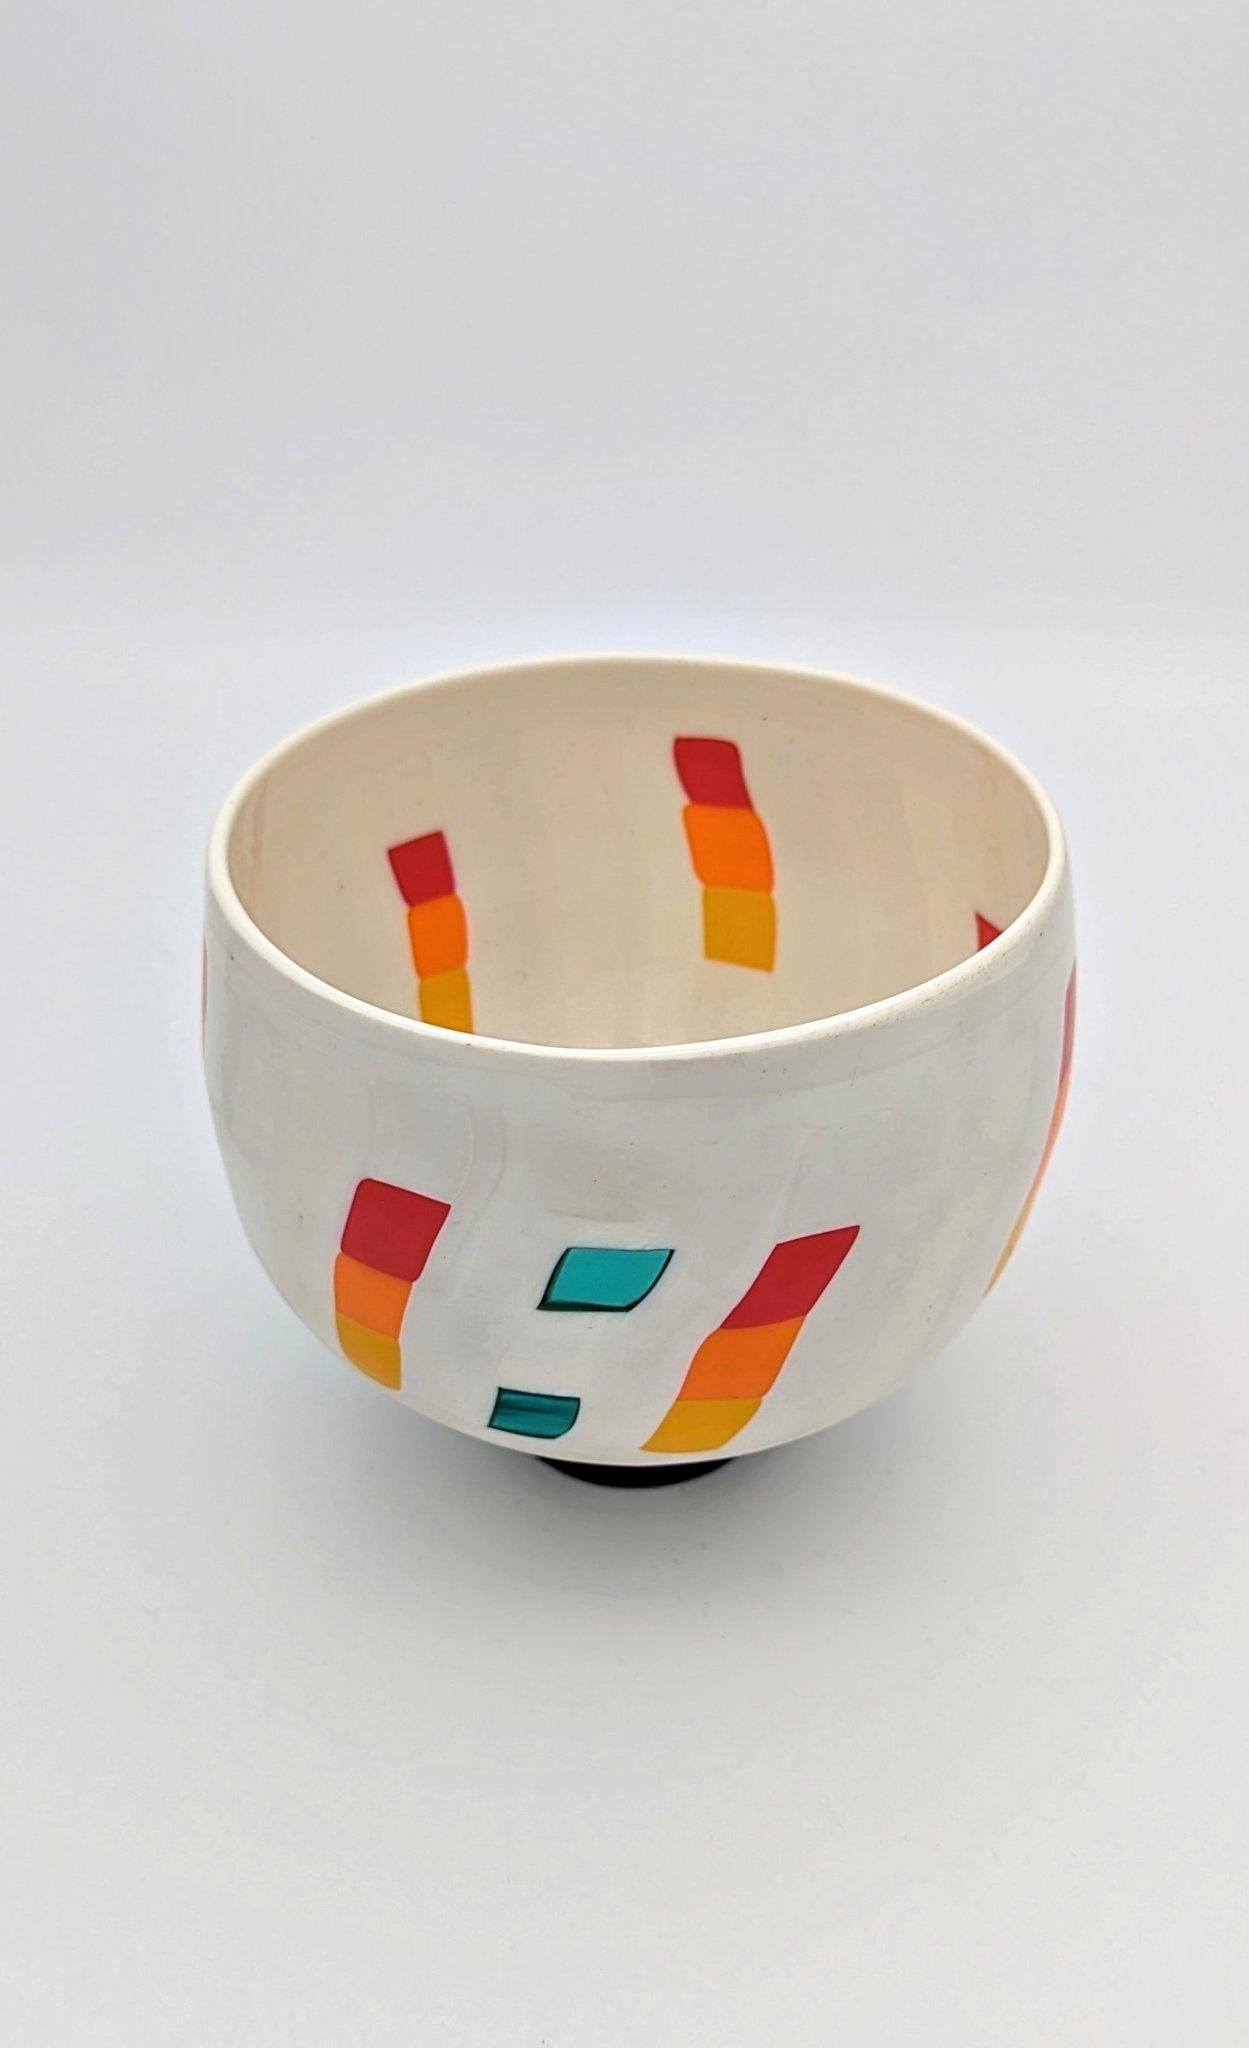 The Funtime's cups is a series of unique footed bowls created by Japanese artist Tsuchida Yasuhiko on the island of Murano. This particular Funtime's cup is a mosaic of glass canes and pieces composes and fused together, then rolled up on the glass